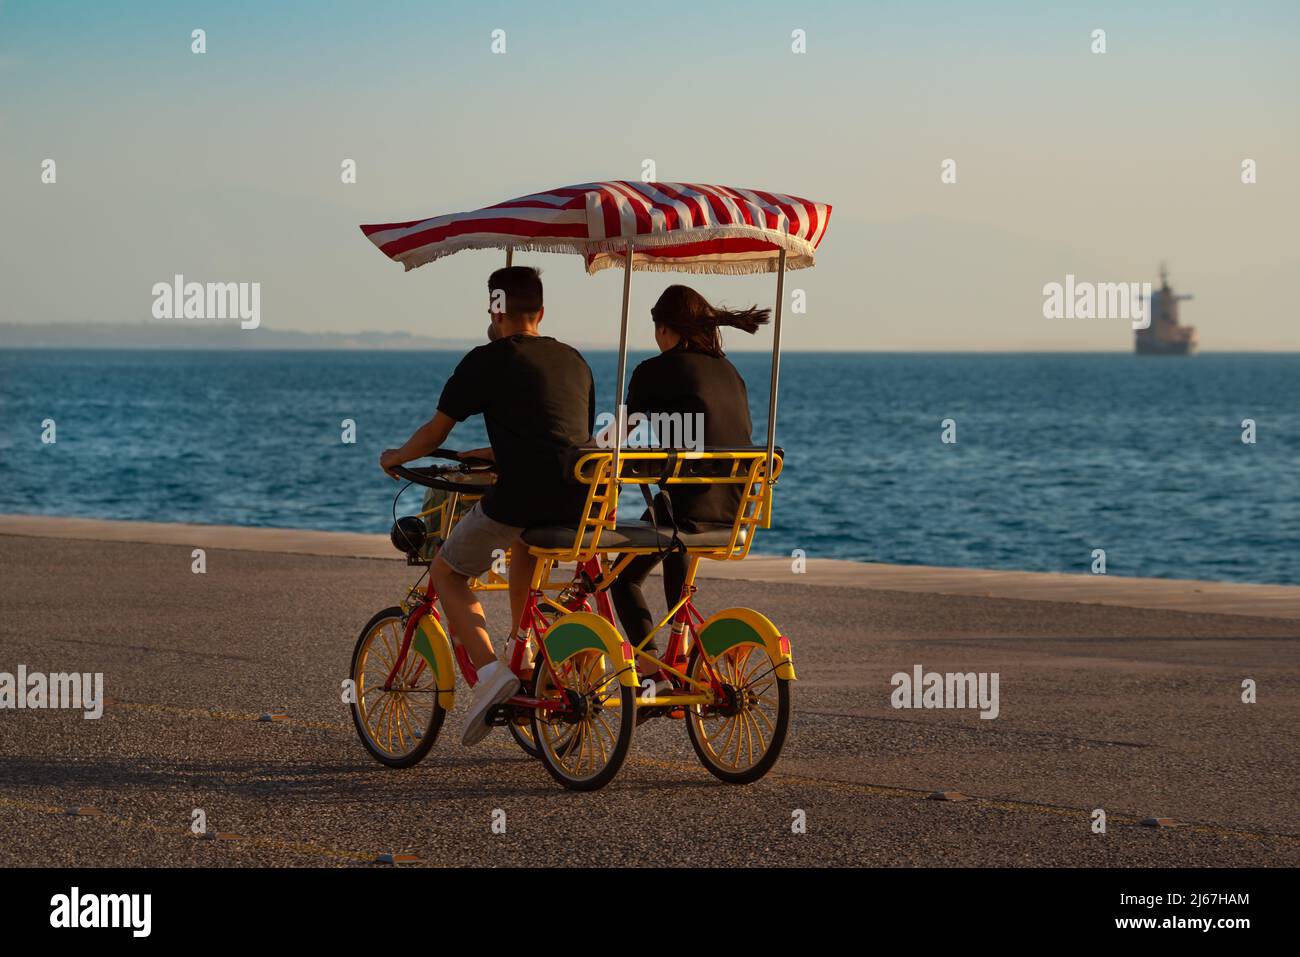 Young couple at sunset riding a four-wheeled bicycle (surrey bike) at promenade close to the sea. Stock Photo